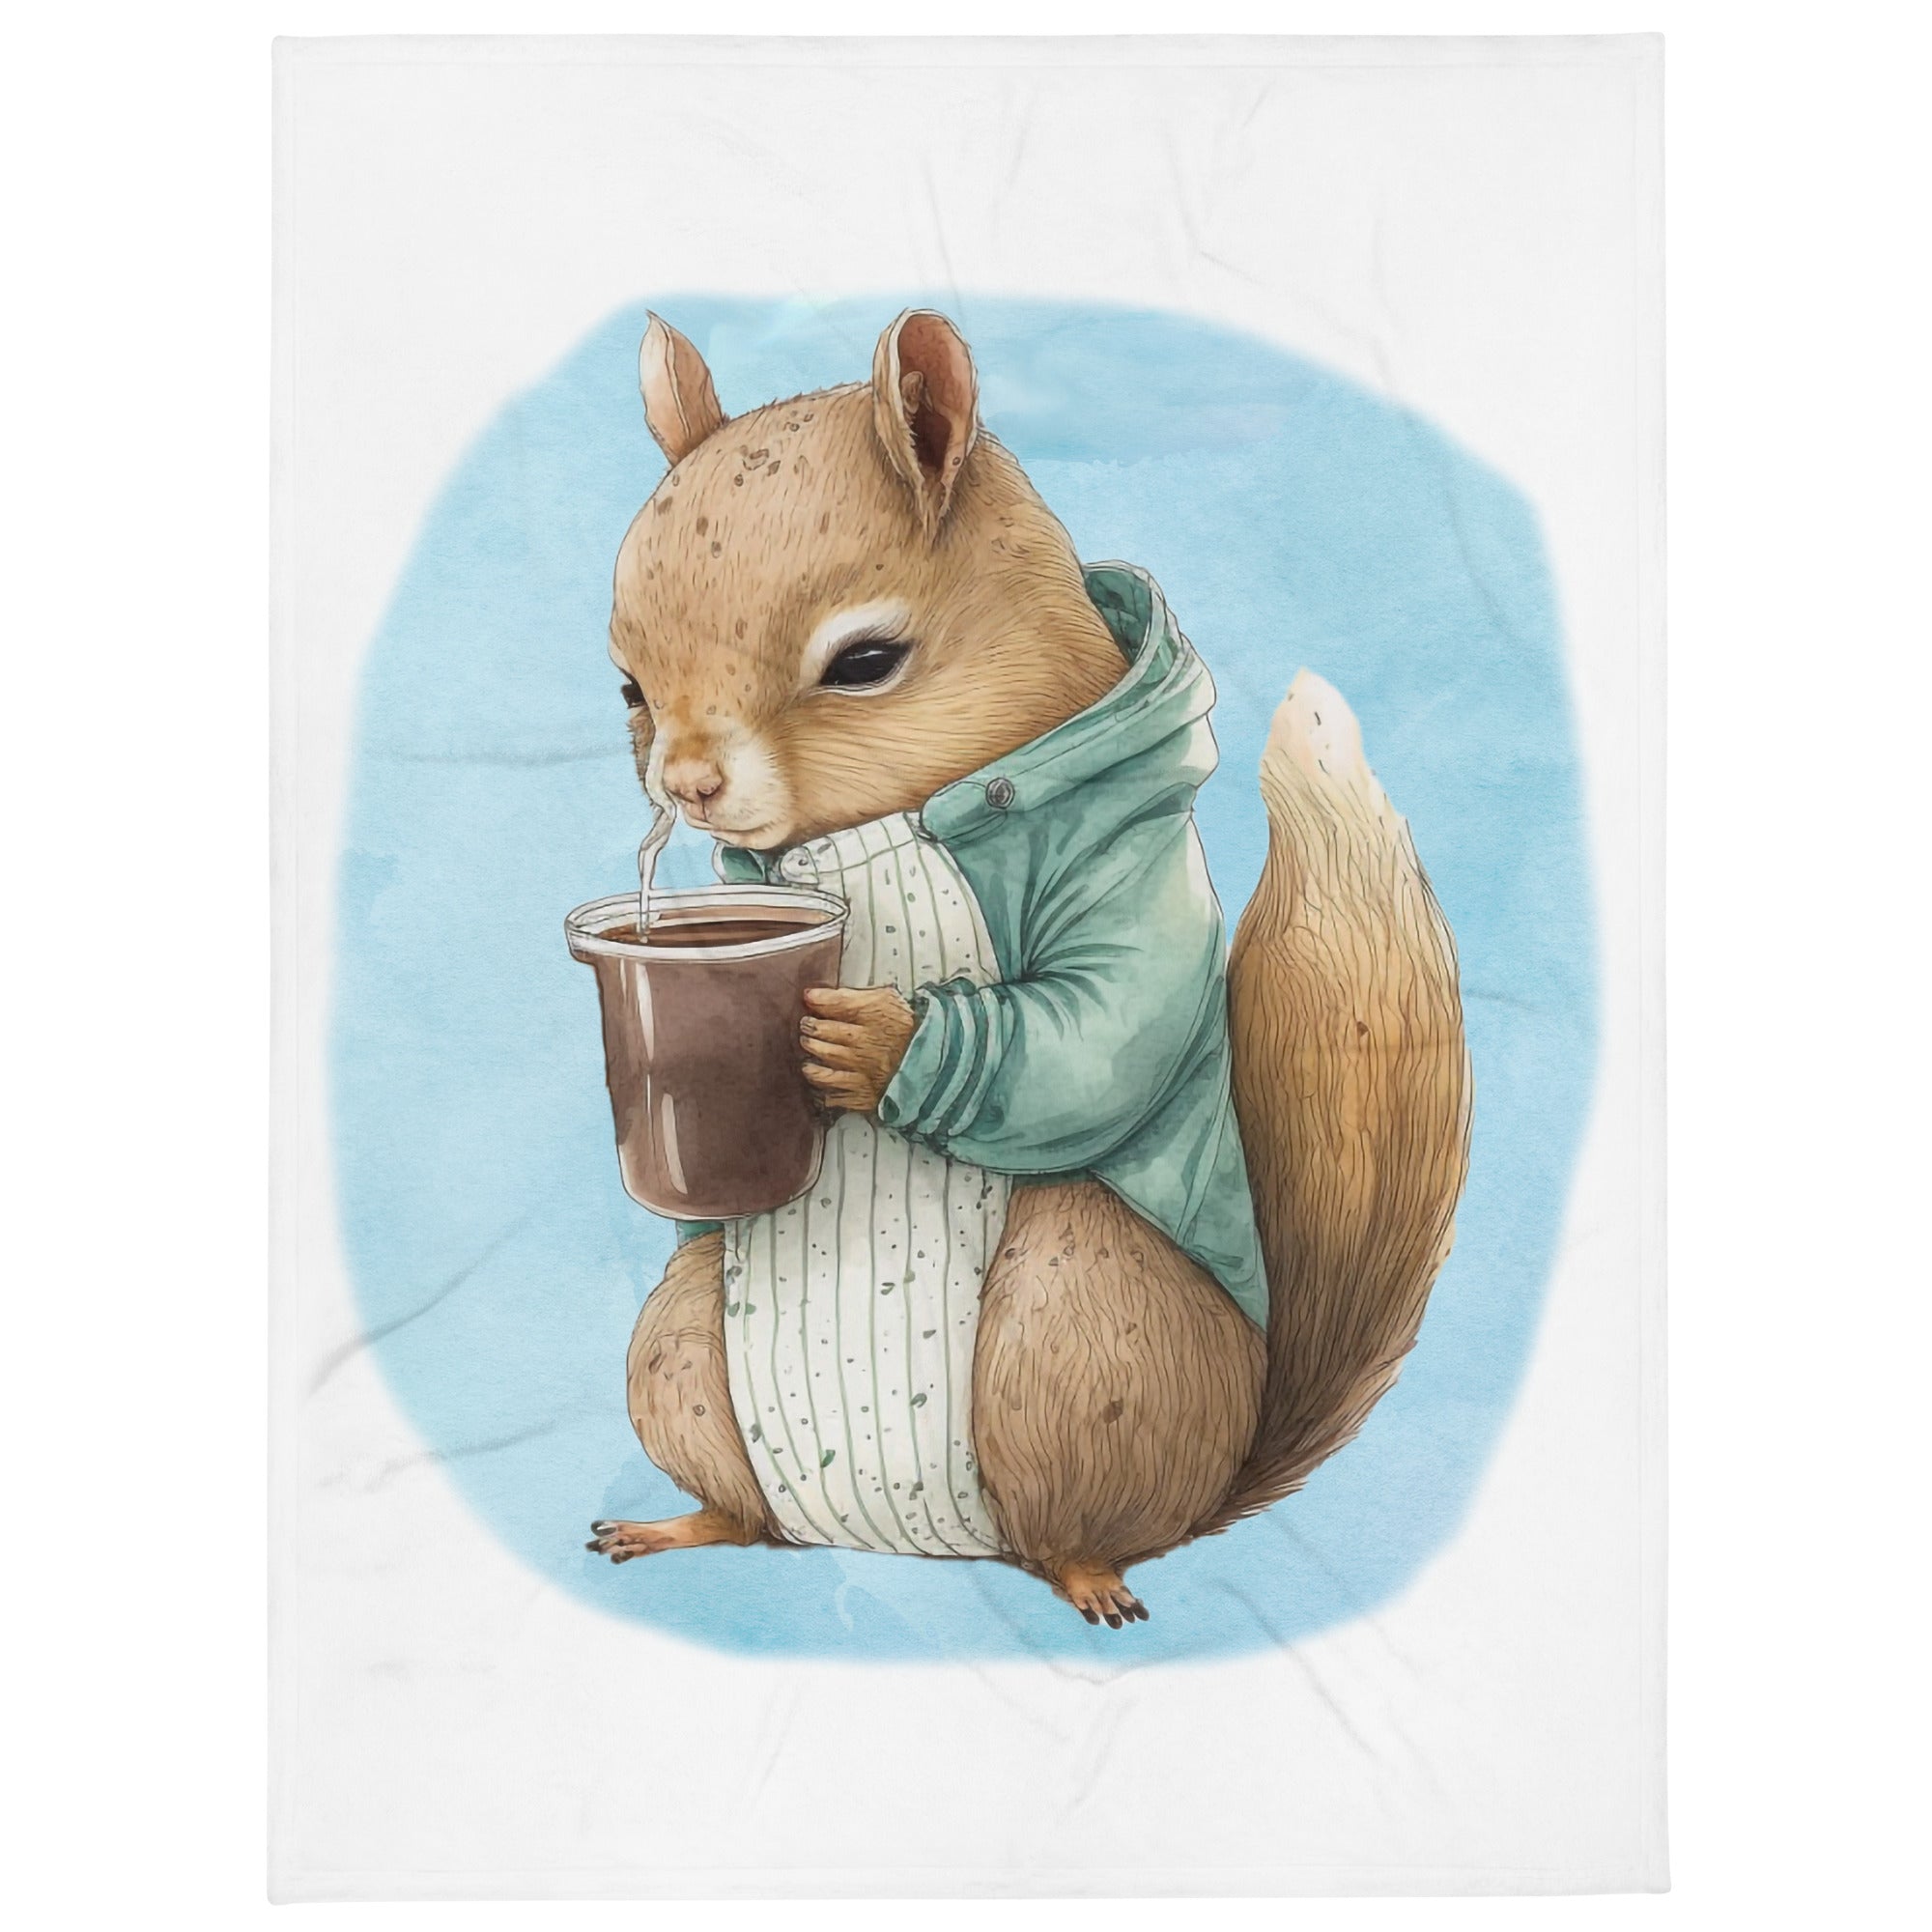 Sleepy Squirrel 100% Polyester Soft Silk Touch Fabric Throw Blanket - Cozy, Durable and Adorable